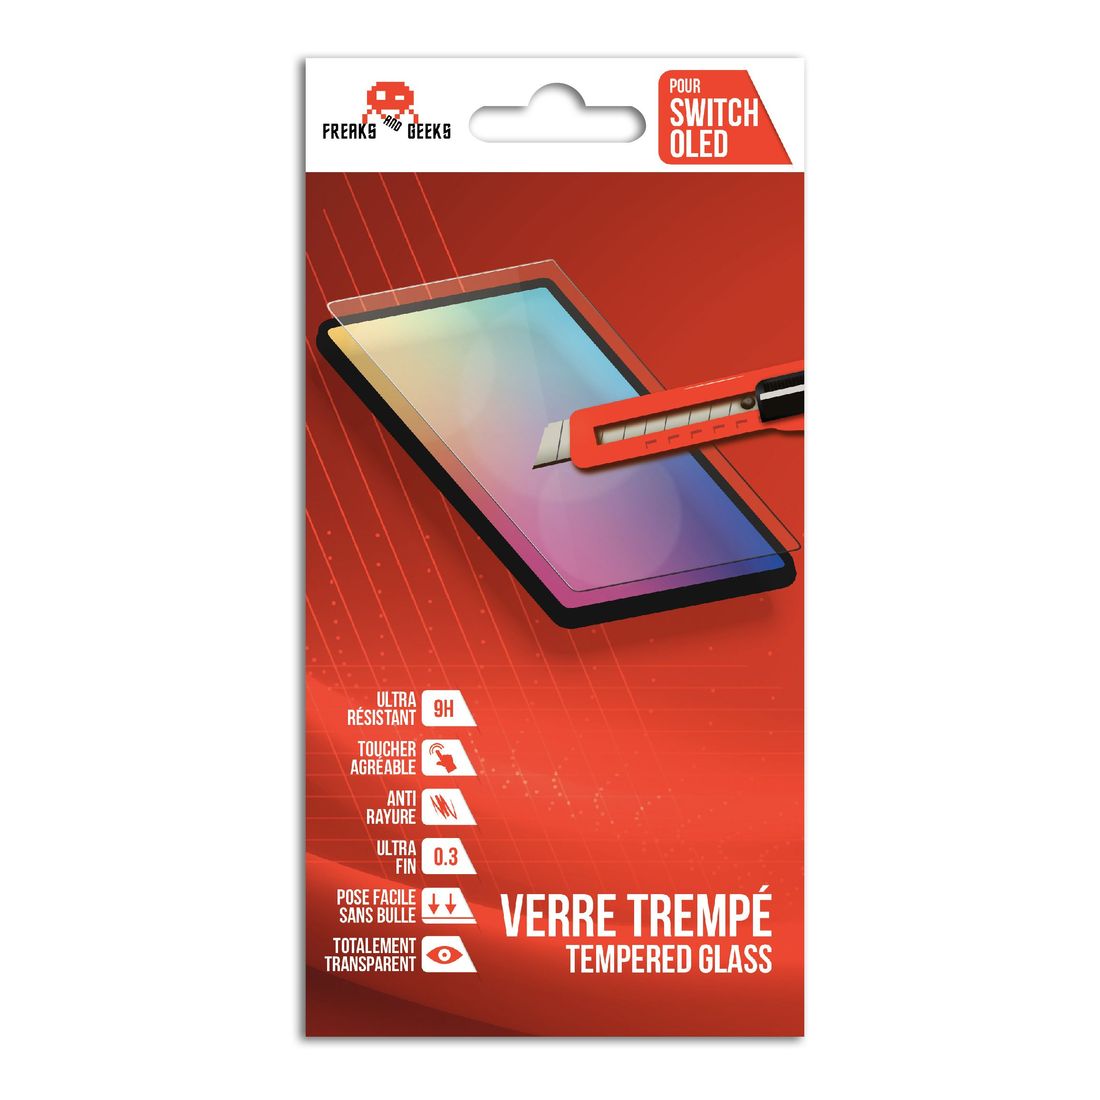 Freaks and Geeks Tempered Glass Screen Protector for Nintendo Switch OLED